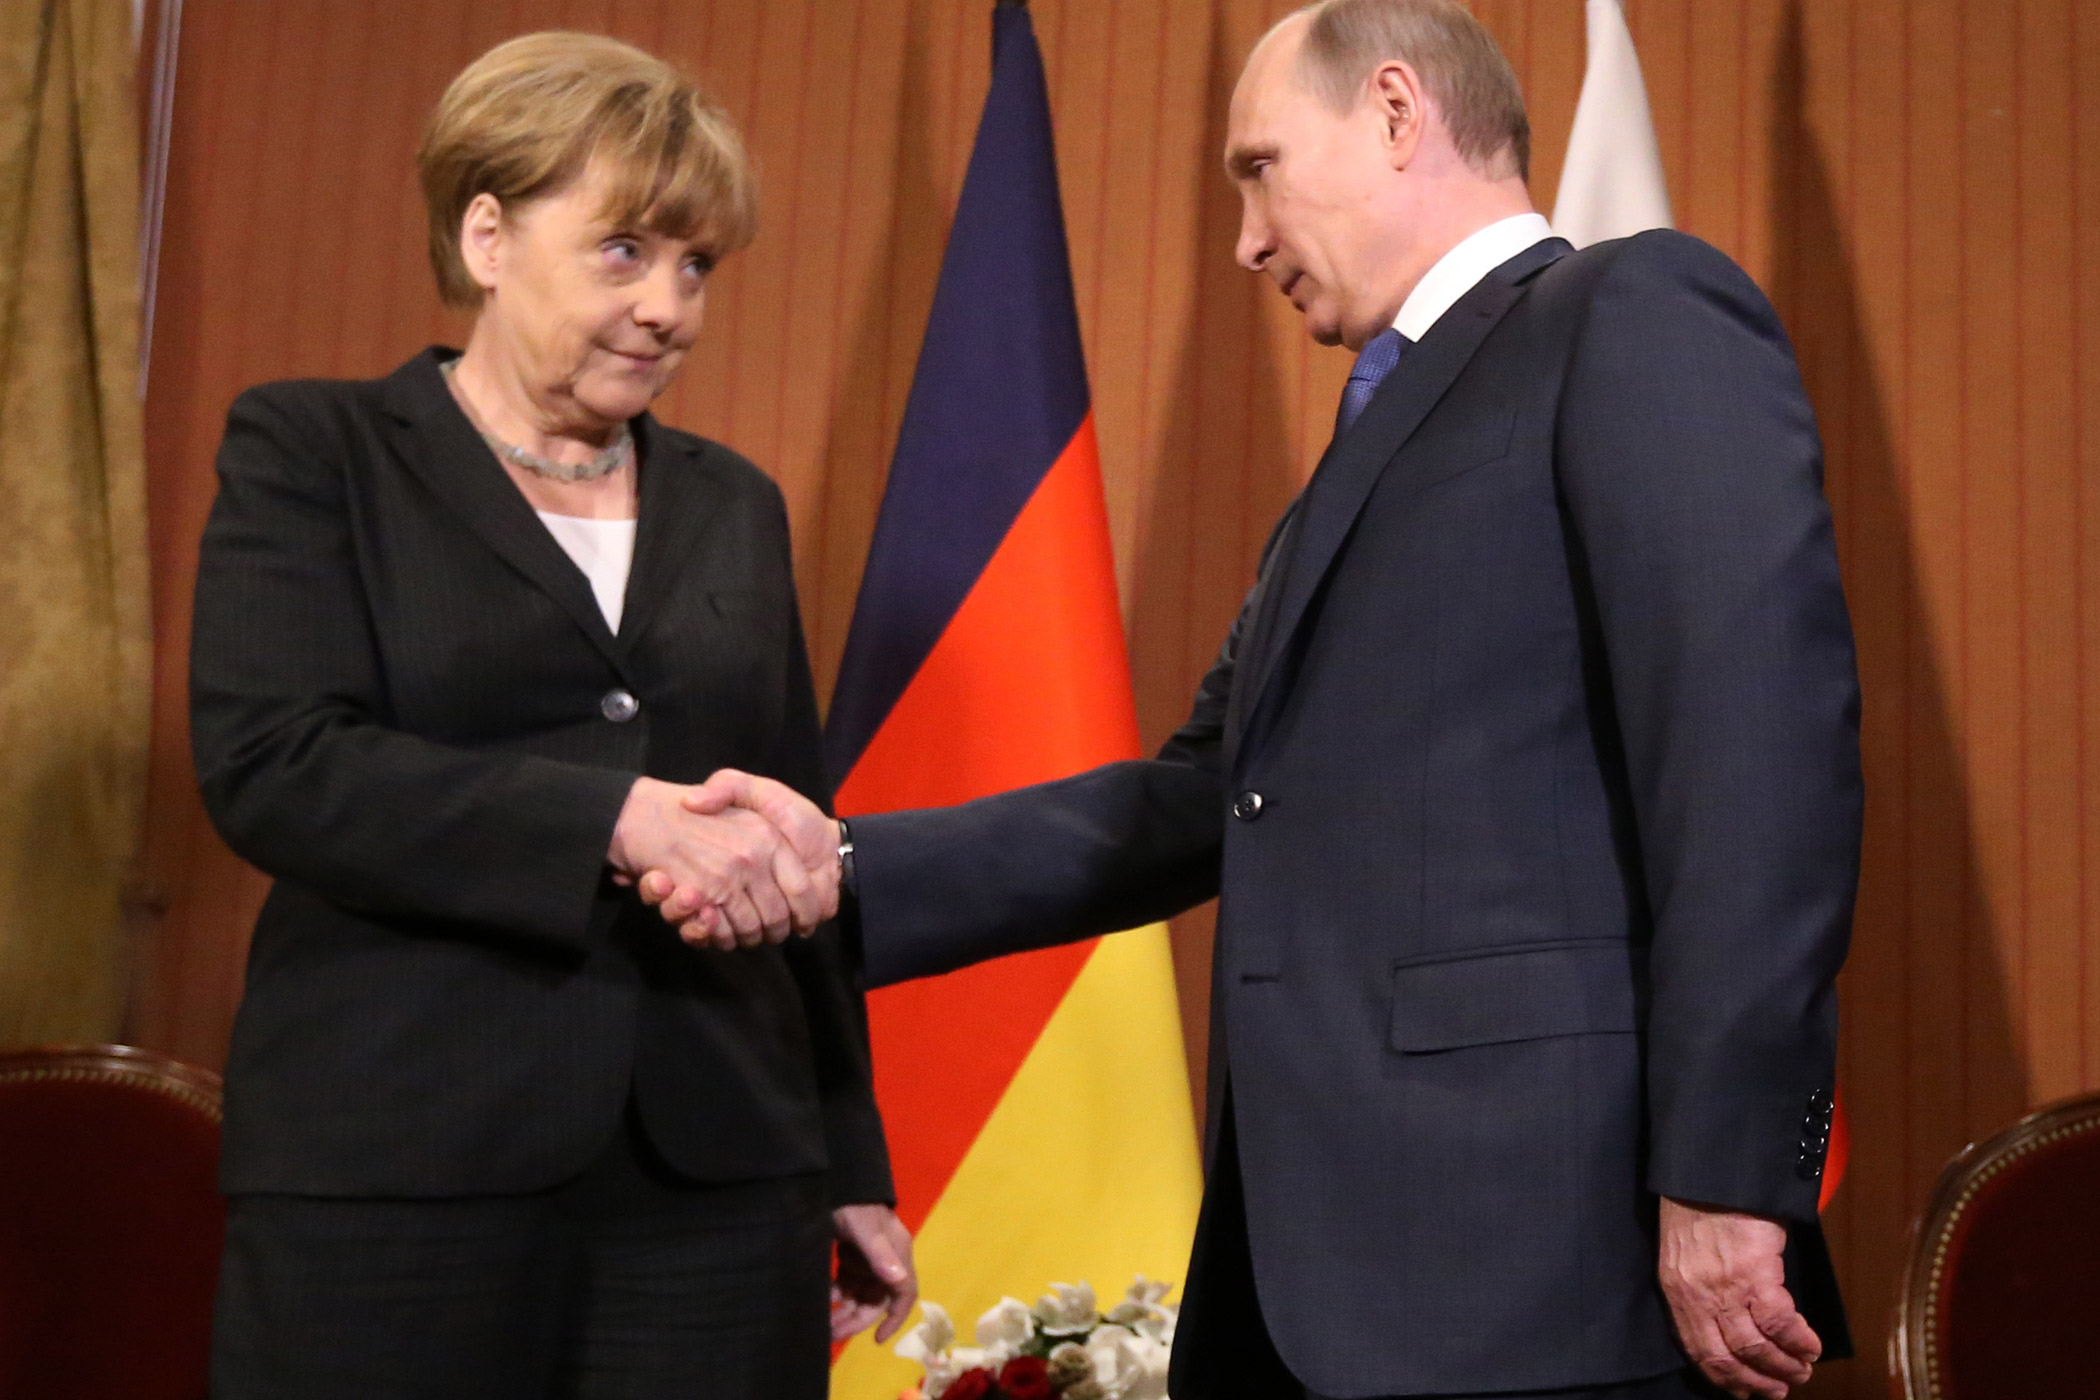 Russian President Vladimir Putin shakes hands with German Chancellor Angela Merkel of Germany during D-Day anniversary celebrations on June 6, 2014 in Deauville, France.